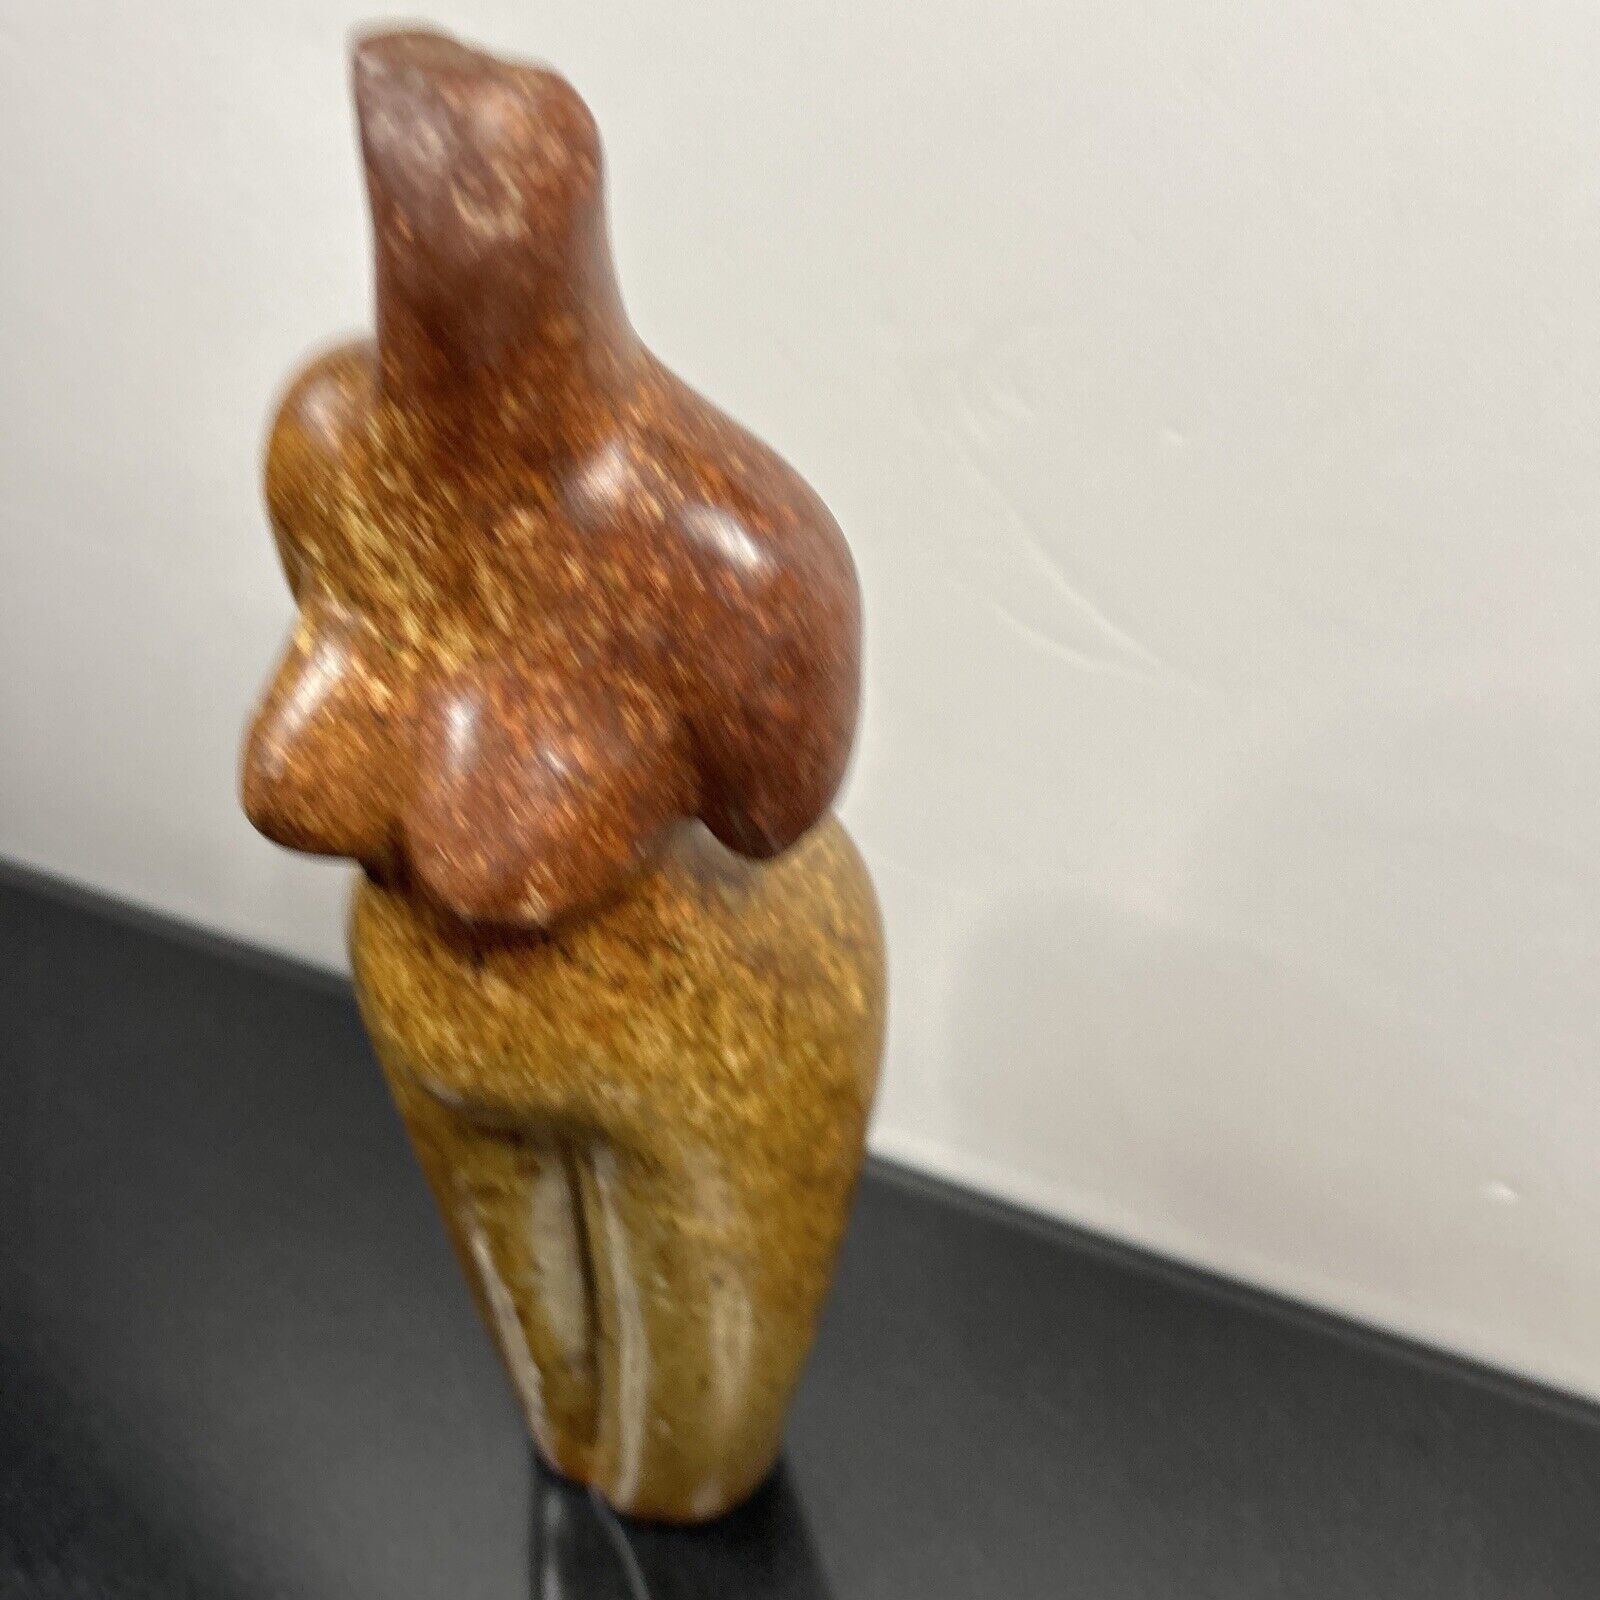 Mother Of Fertility Zimbabwe Sculpture Signed By The Original Artist